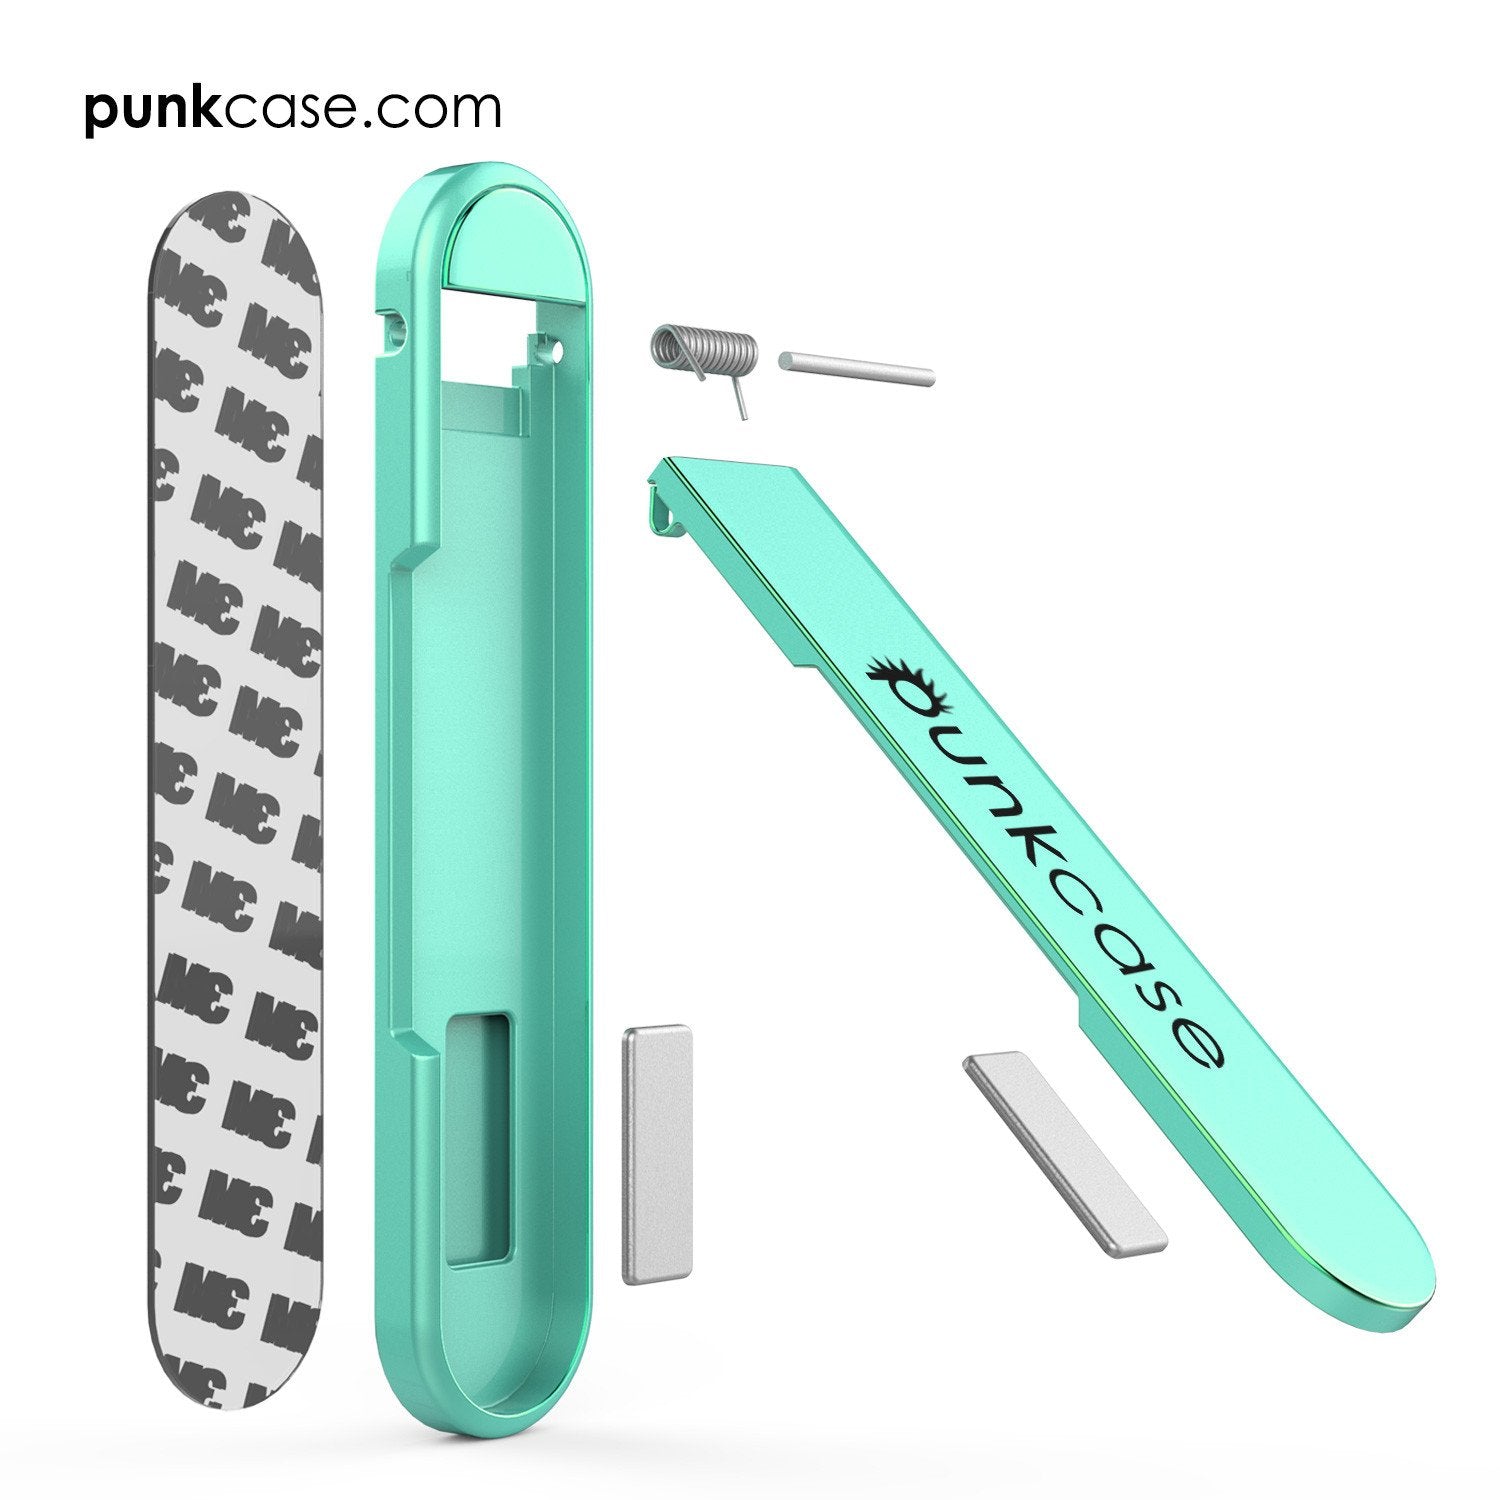 PUNKCASE FlickStick Universal Cell Phone Kickstand for all Mobile Phones & Cases with Flat Backs, One Finger Operation (Teal)